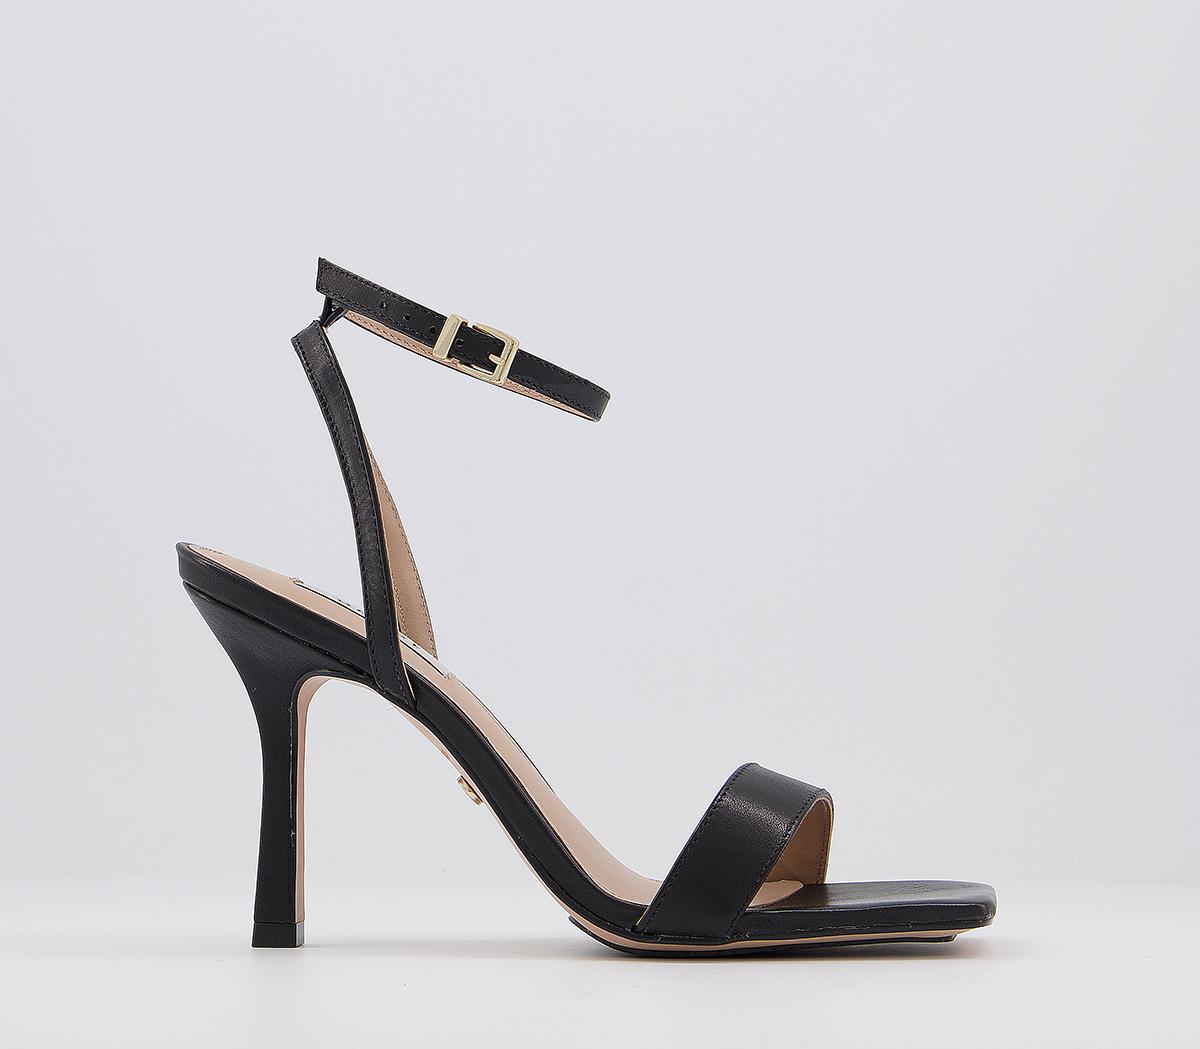 OFFICEMoonlight Ankle Strap Square Toe SandalsBlack Leather